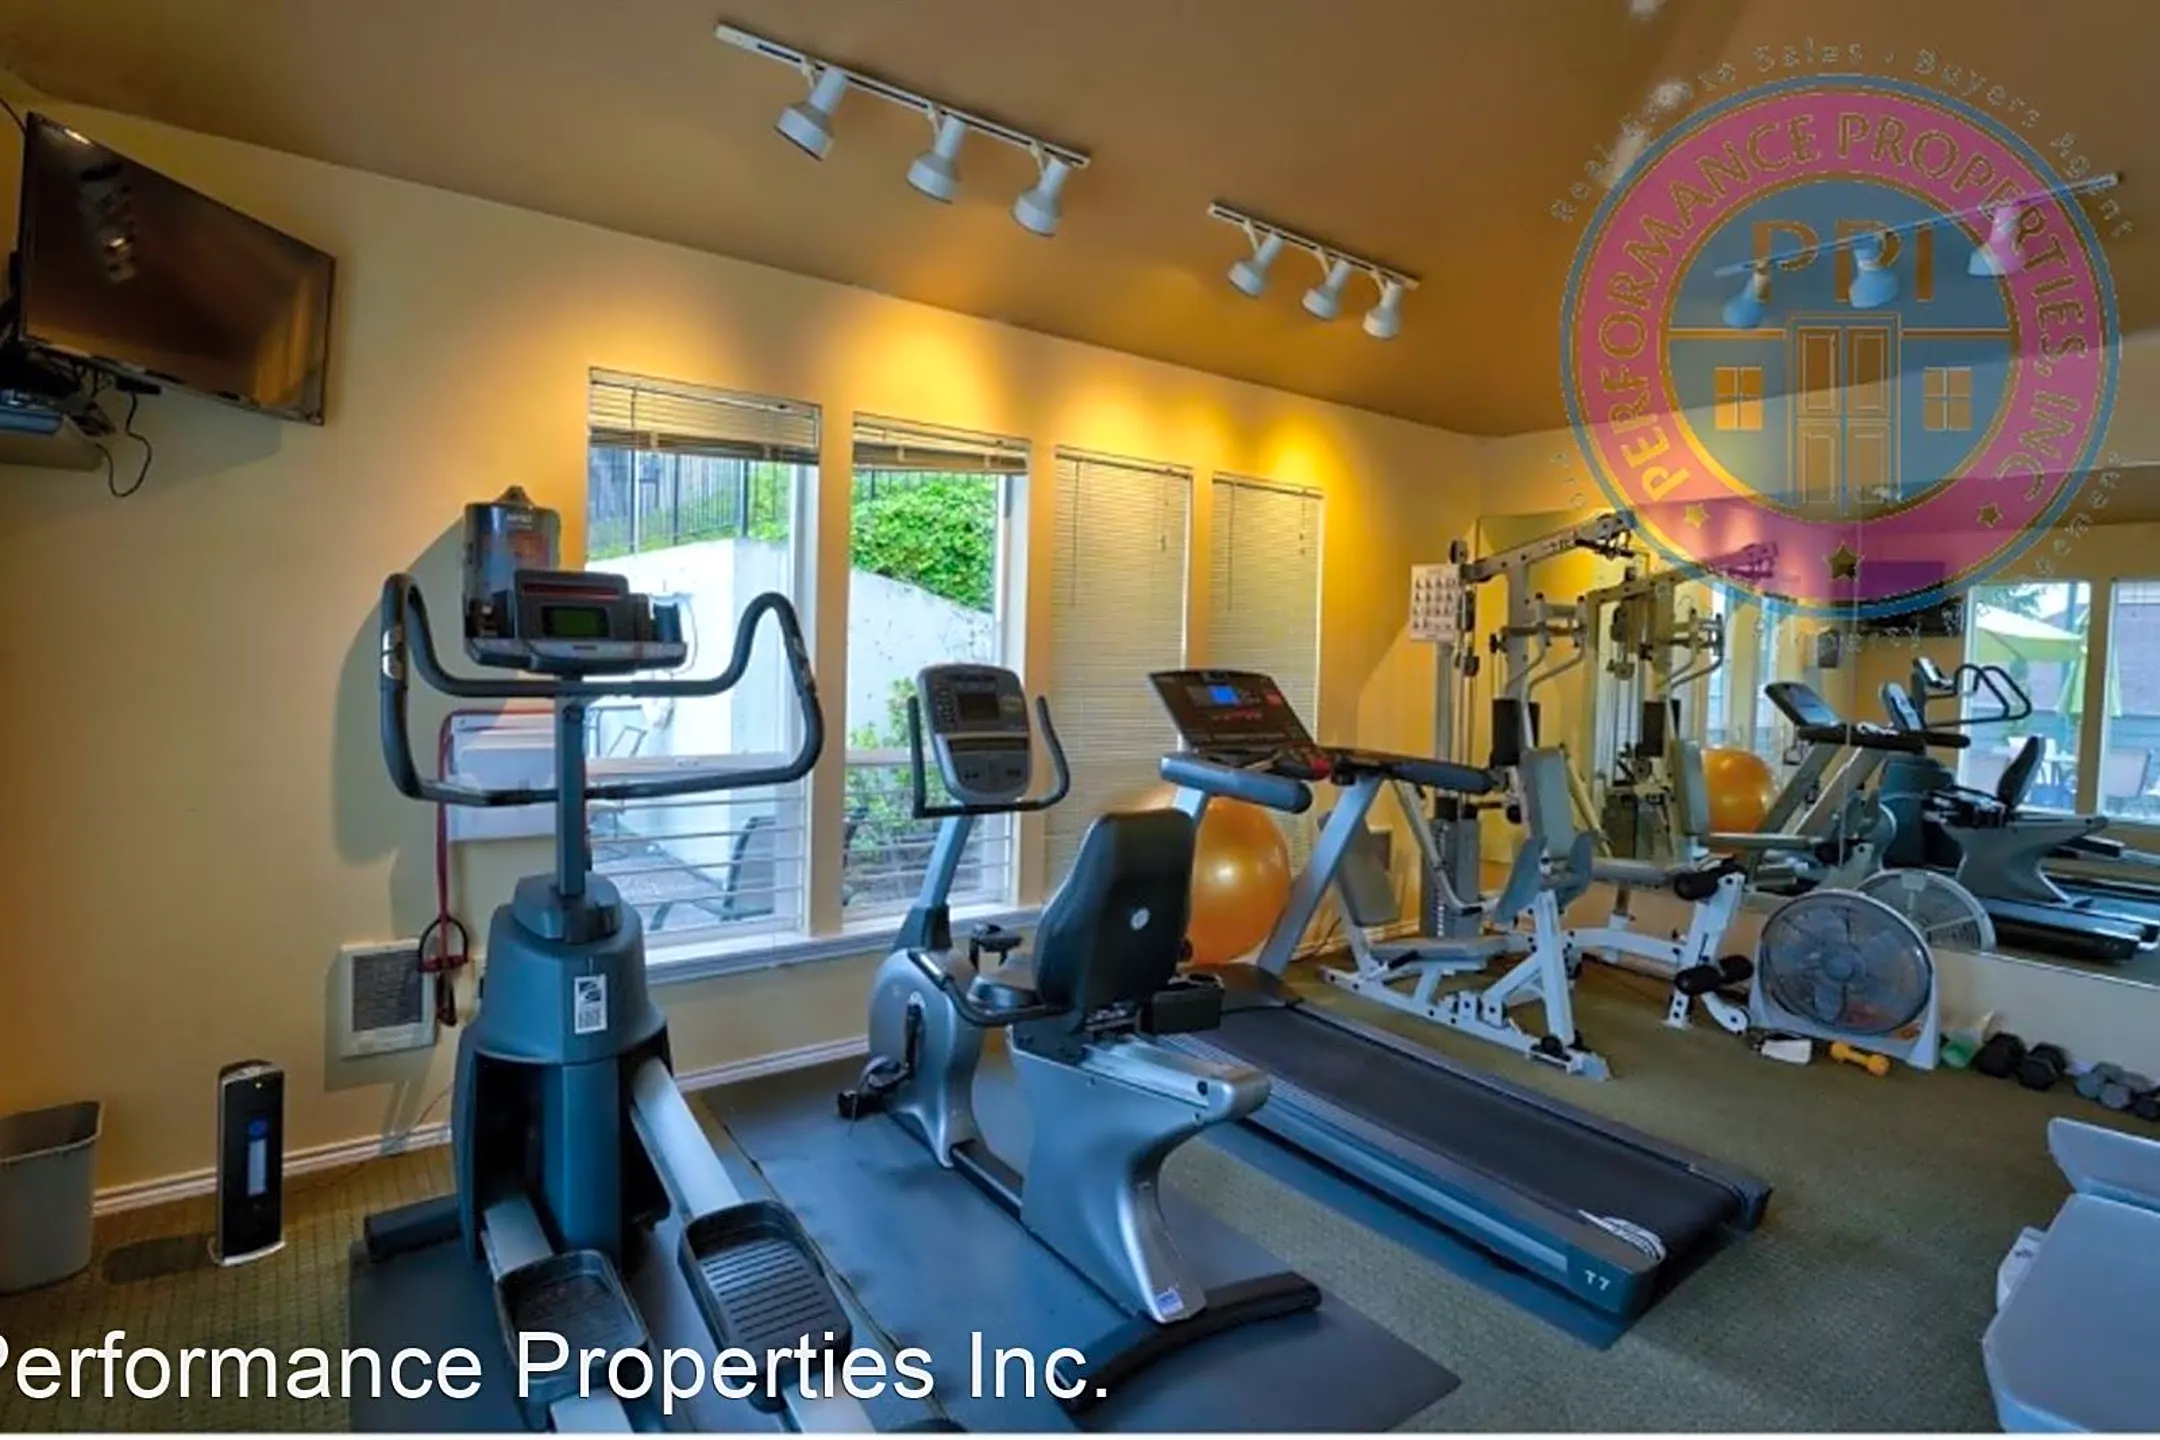 Fitness Weight Room - 20910 Fawn Ct - West Linn, OR